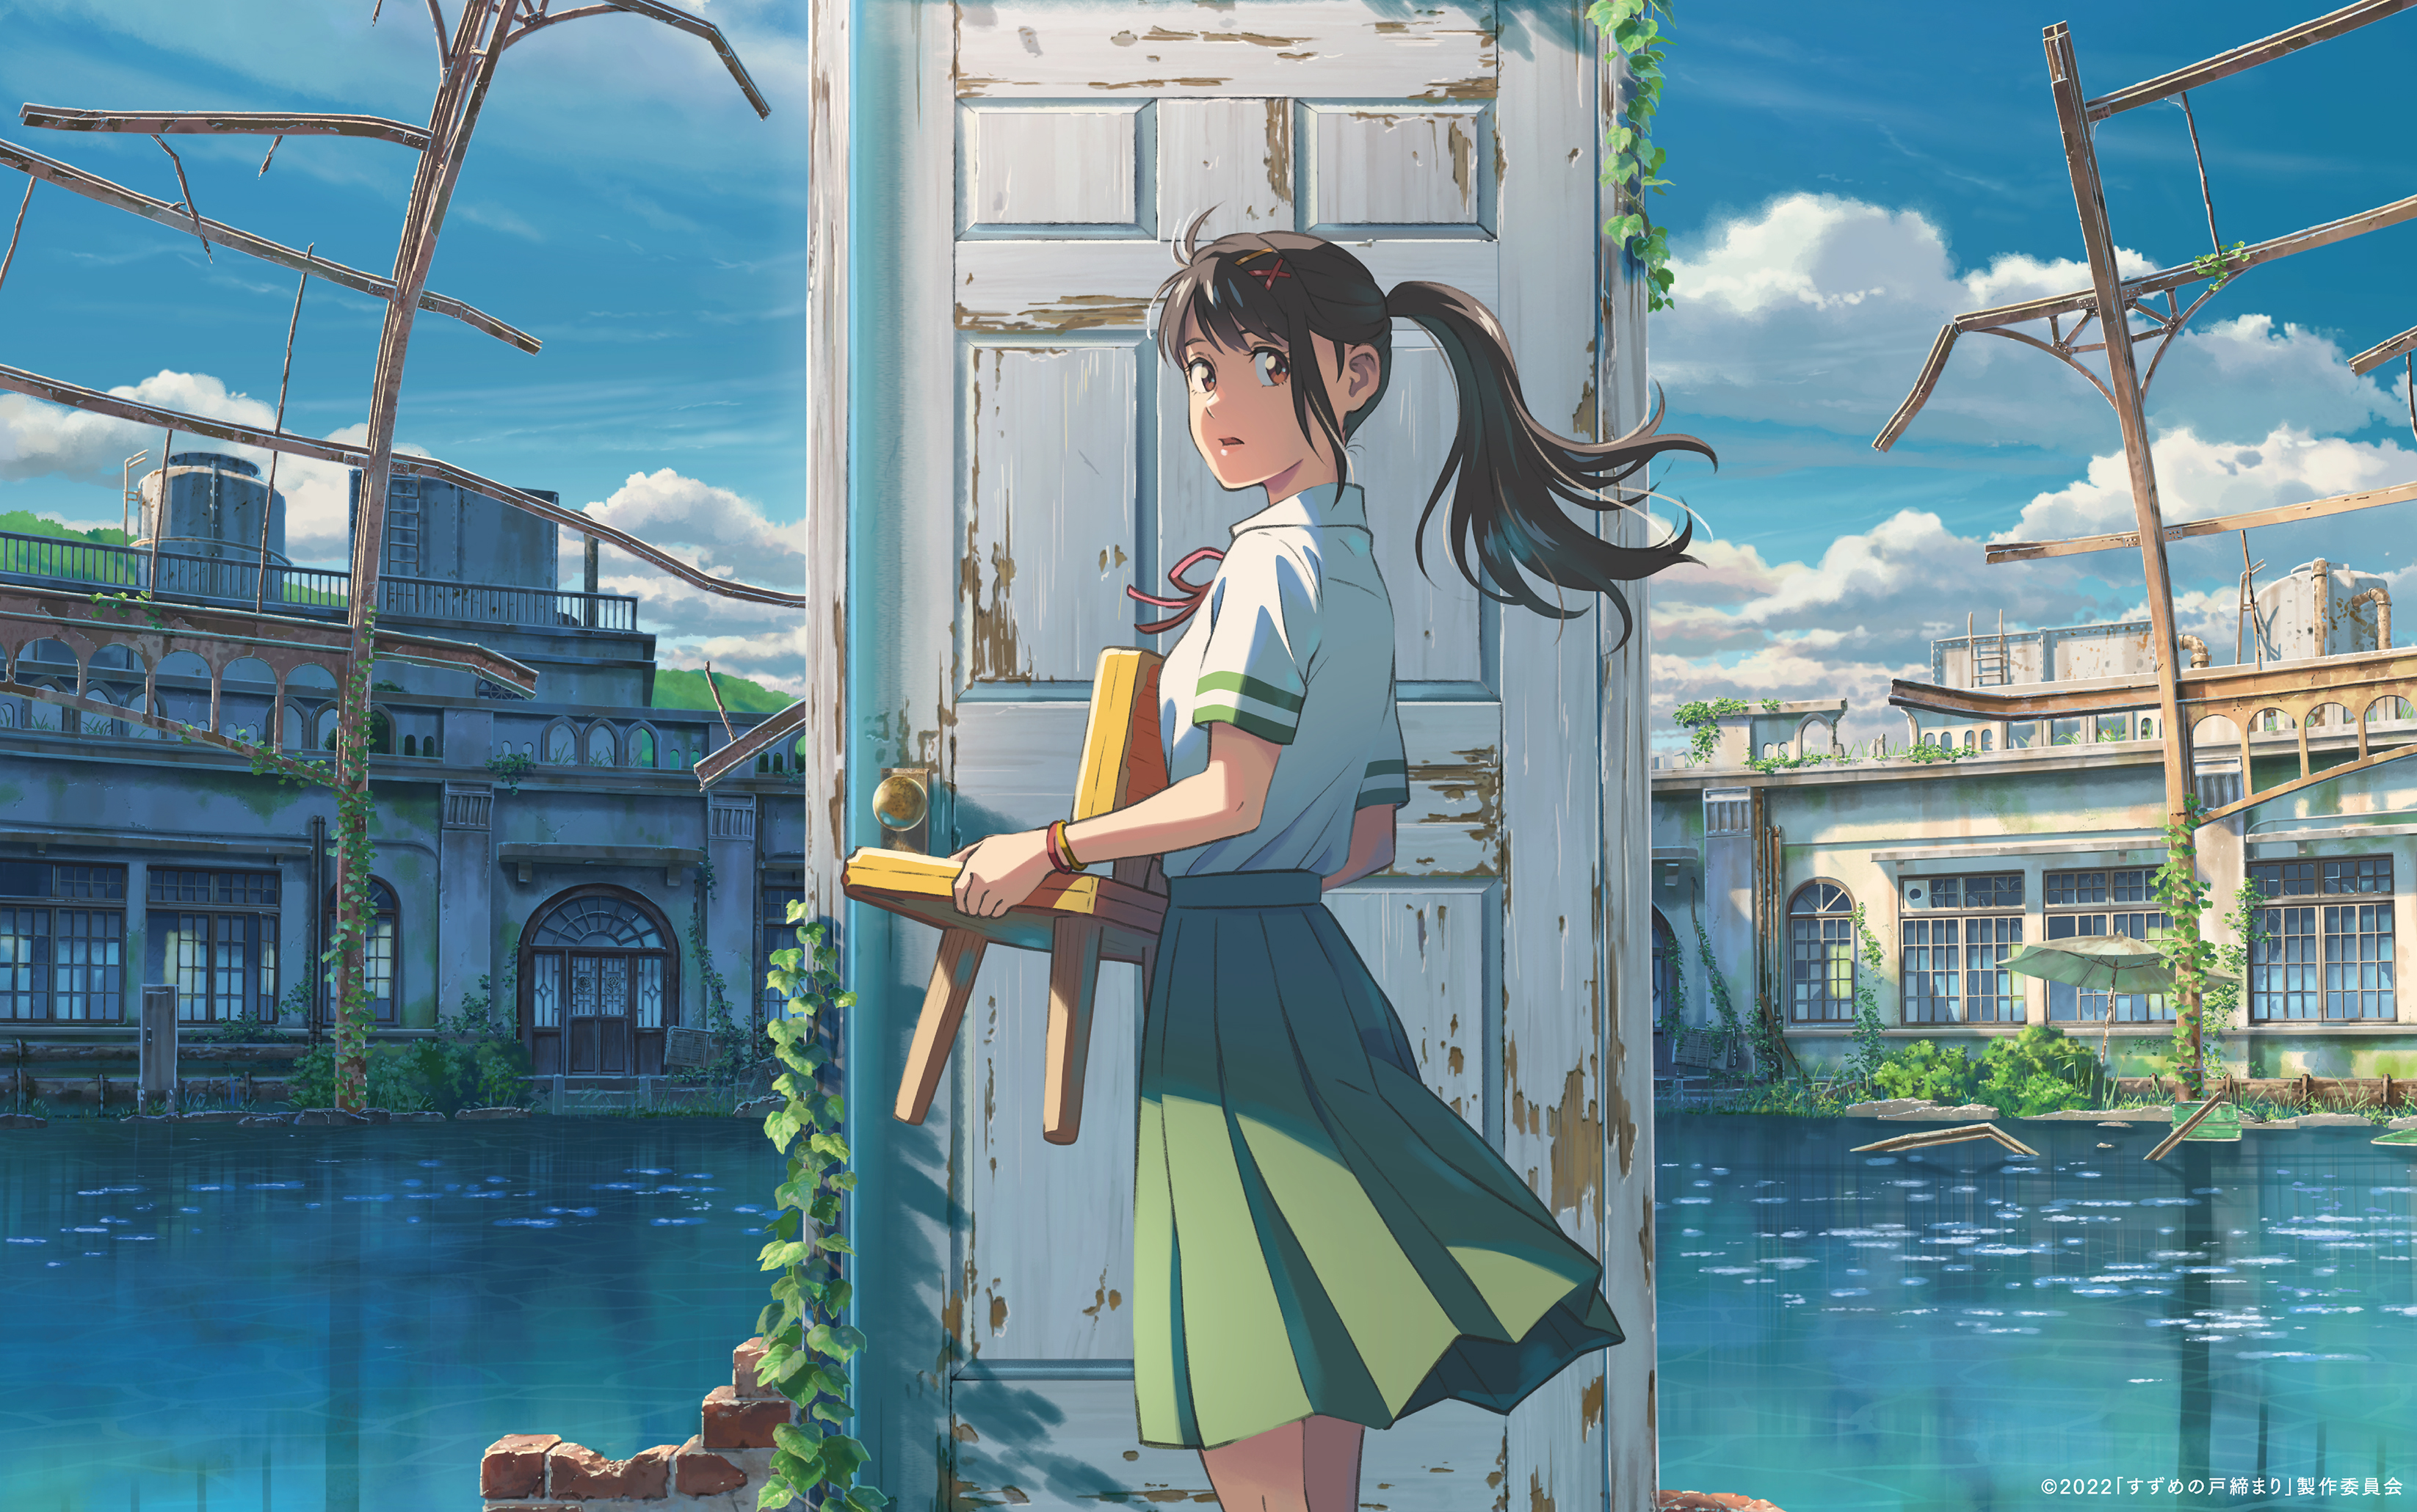 Suzume, a teenage girl in a school uniform, holds a chair as she stands in front of a dilapidated doorway in the middle of a shallow body of water, which itself is in the middle of some ruins